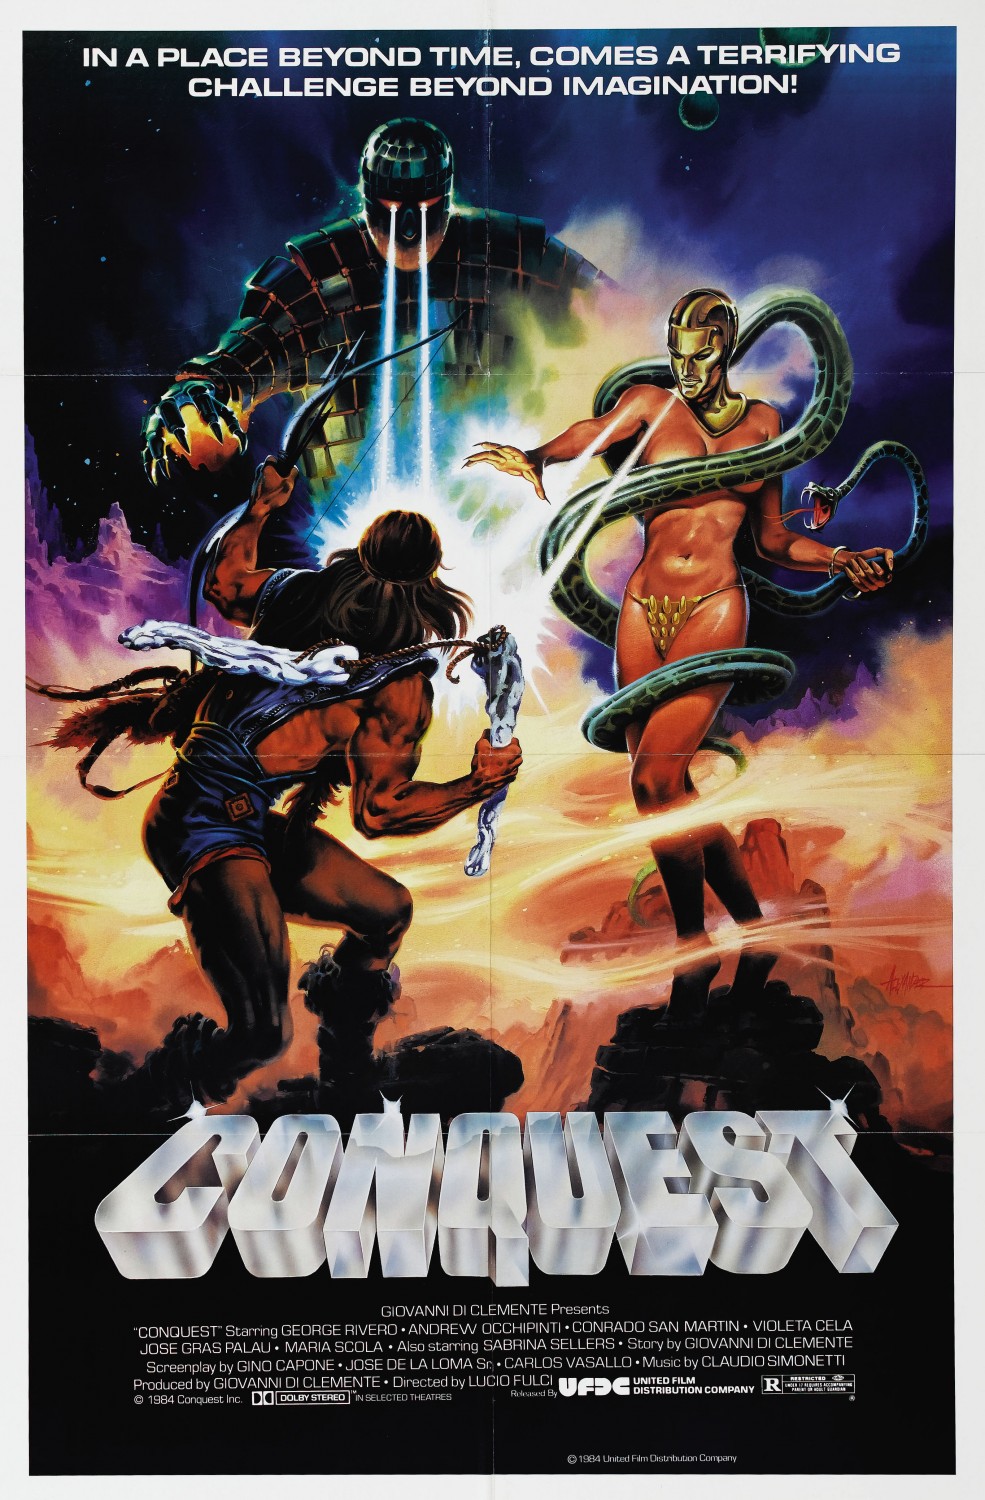 Extra Large Movie Poster Image for Conquest 